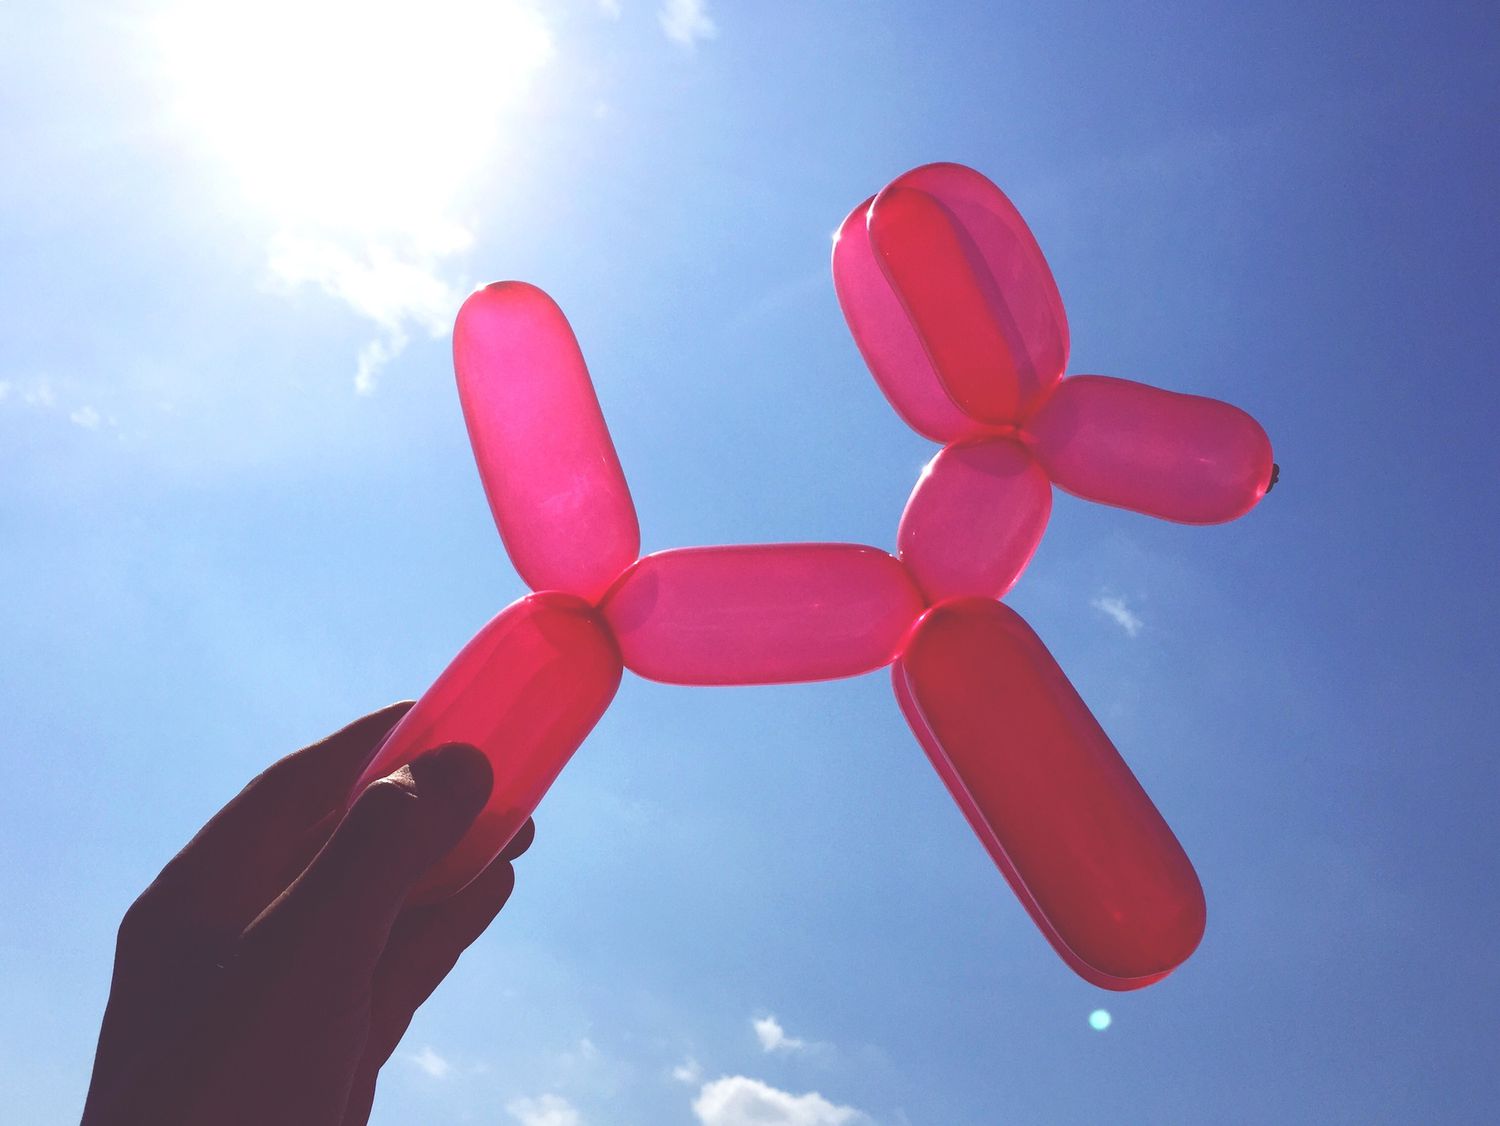 hand holding balloon dog against the sky with sun shining